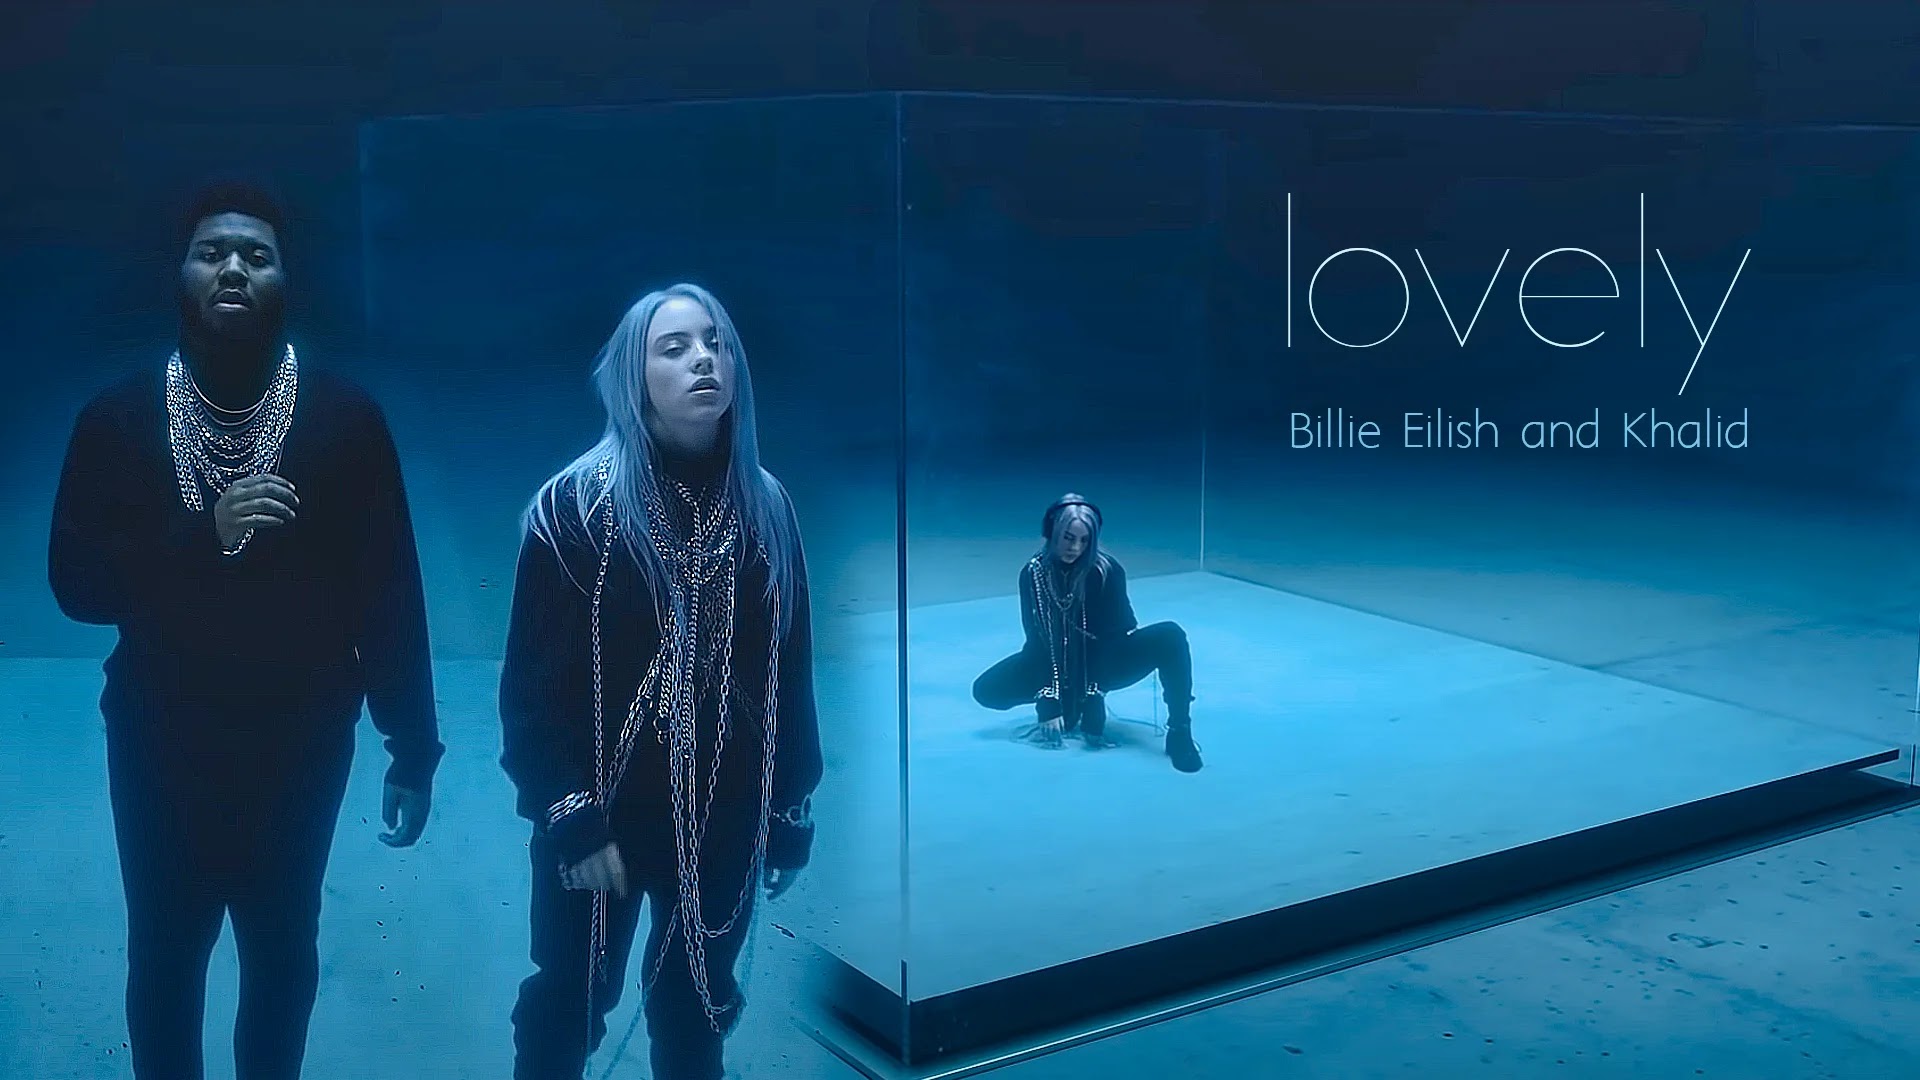 9. Billie Eilish's blue hair and red and black outfit from her "Lovely" music video with Khalid - wide 4